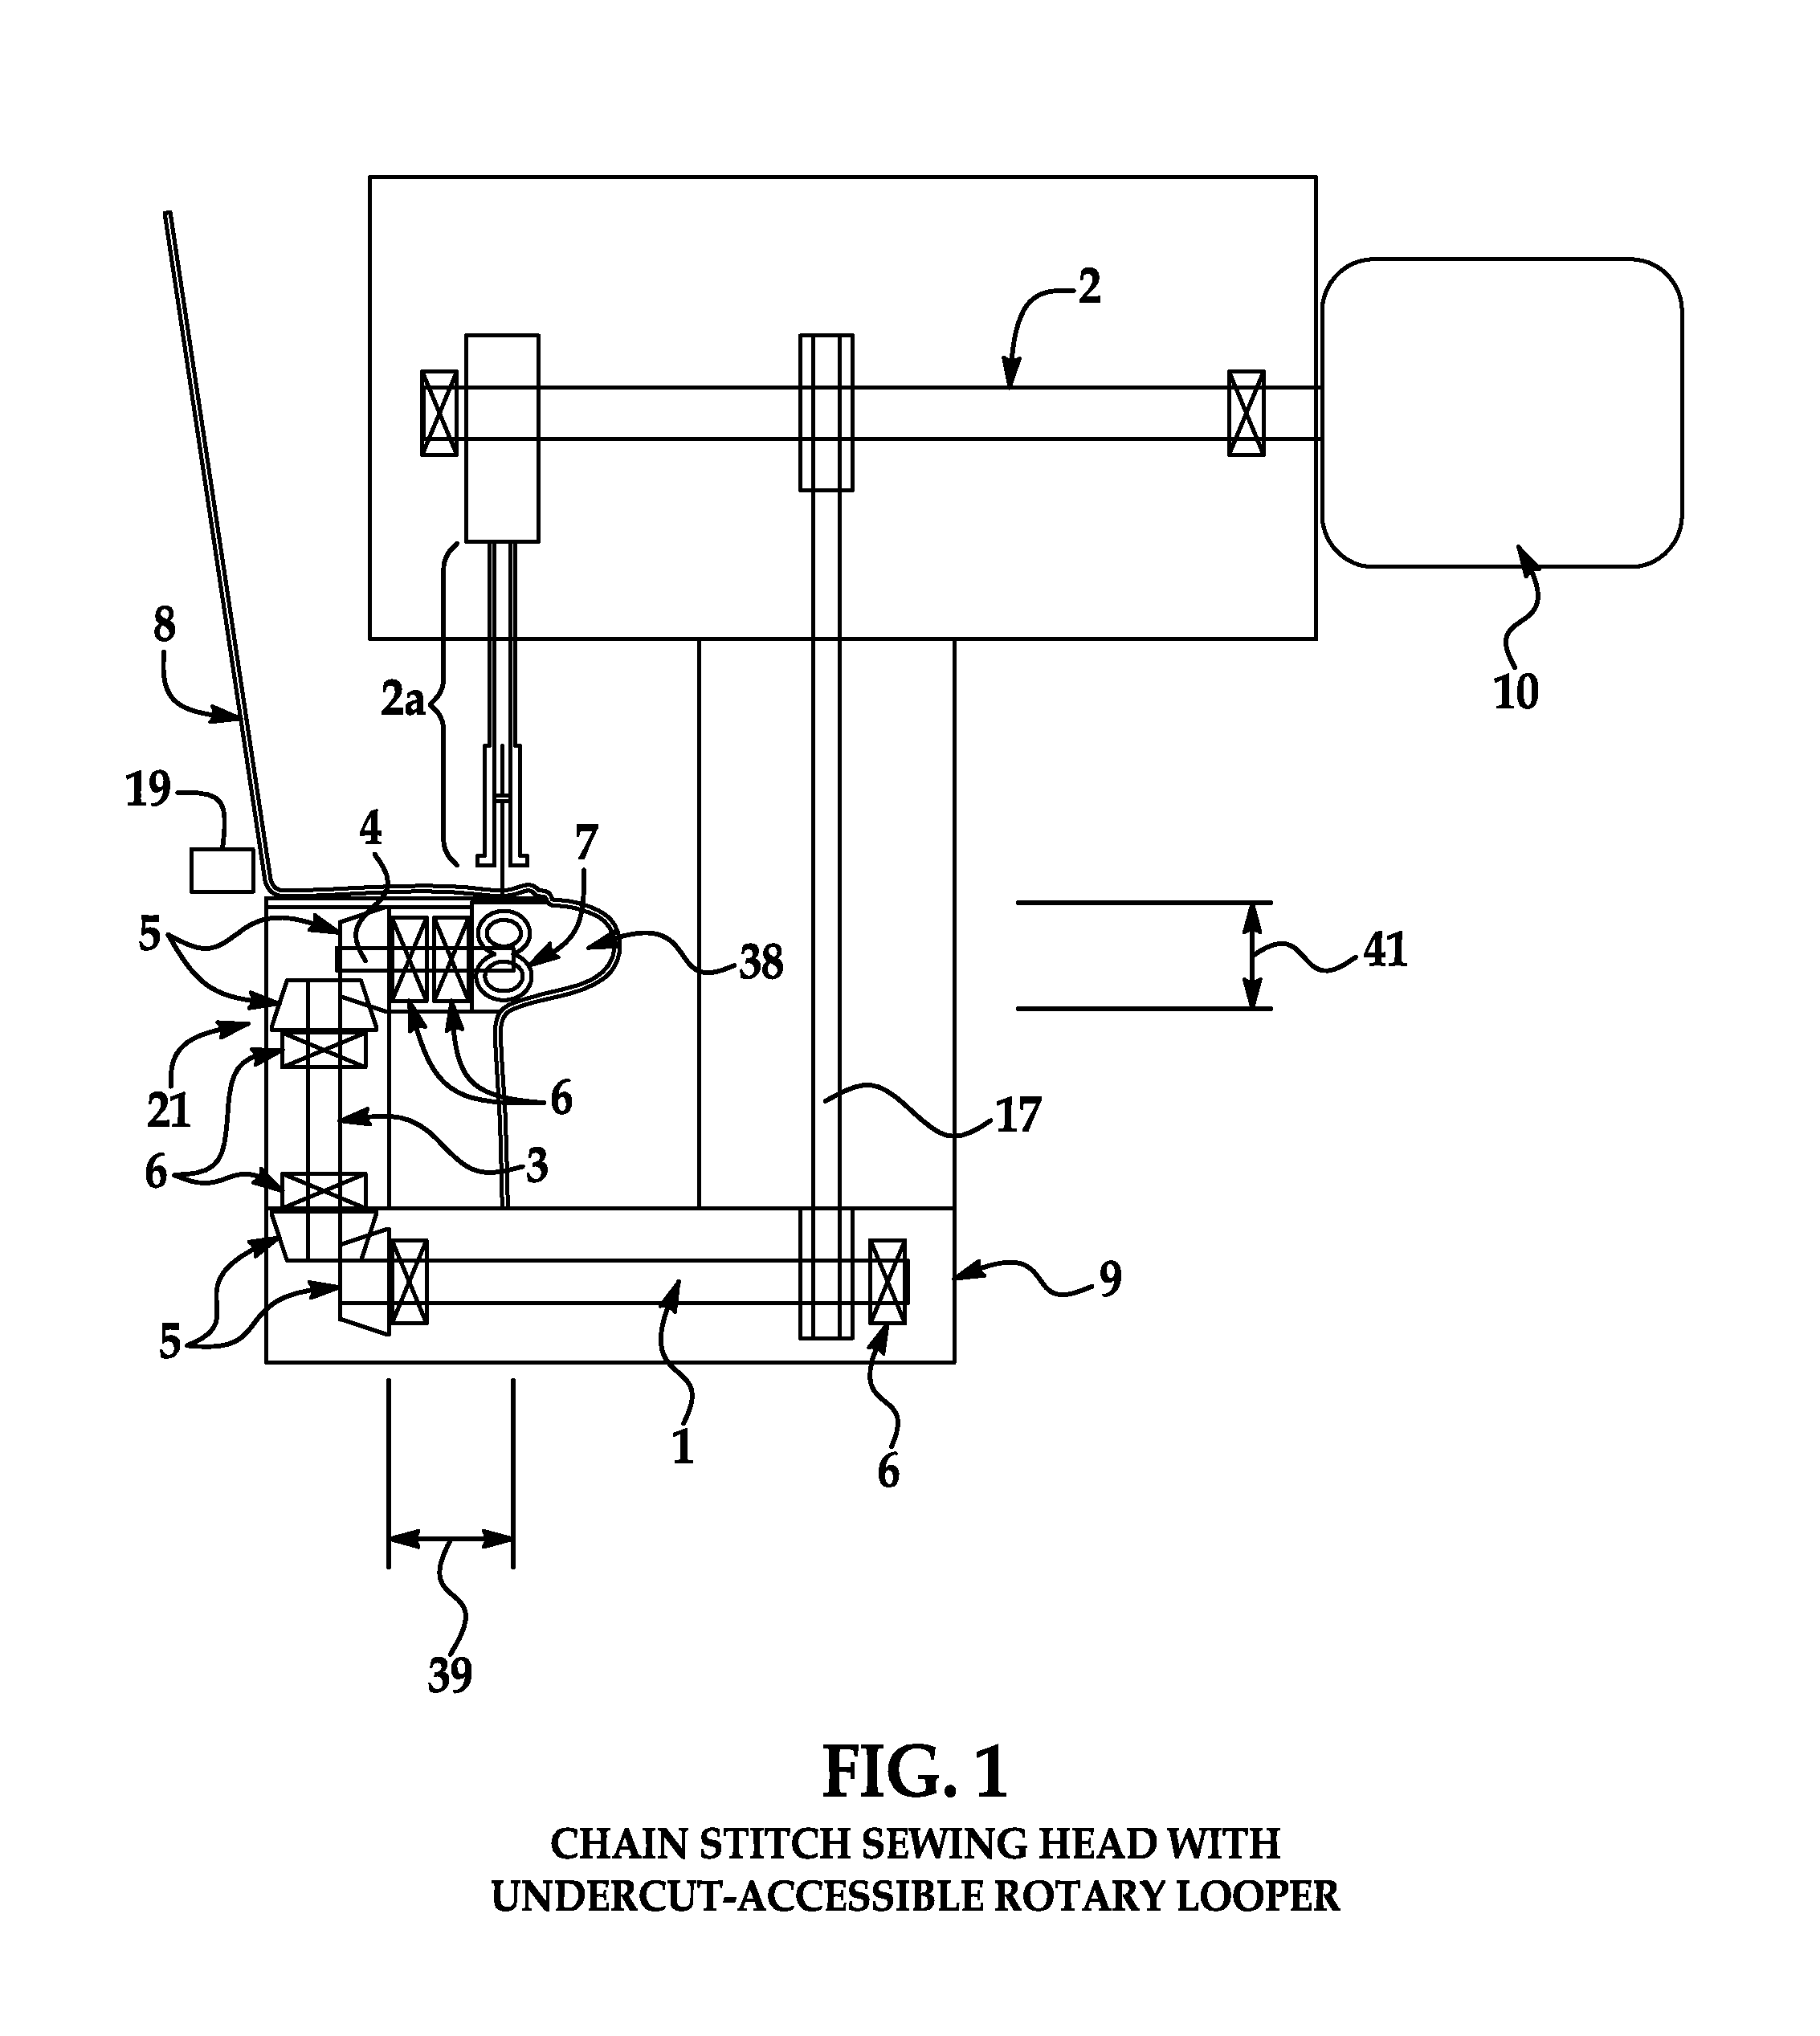 Apparatus for stitching vehicle interior components